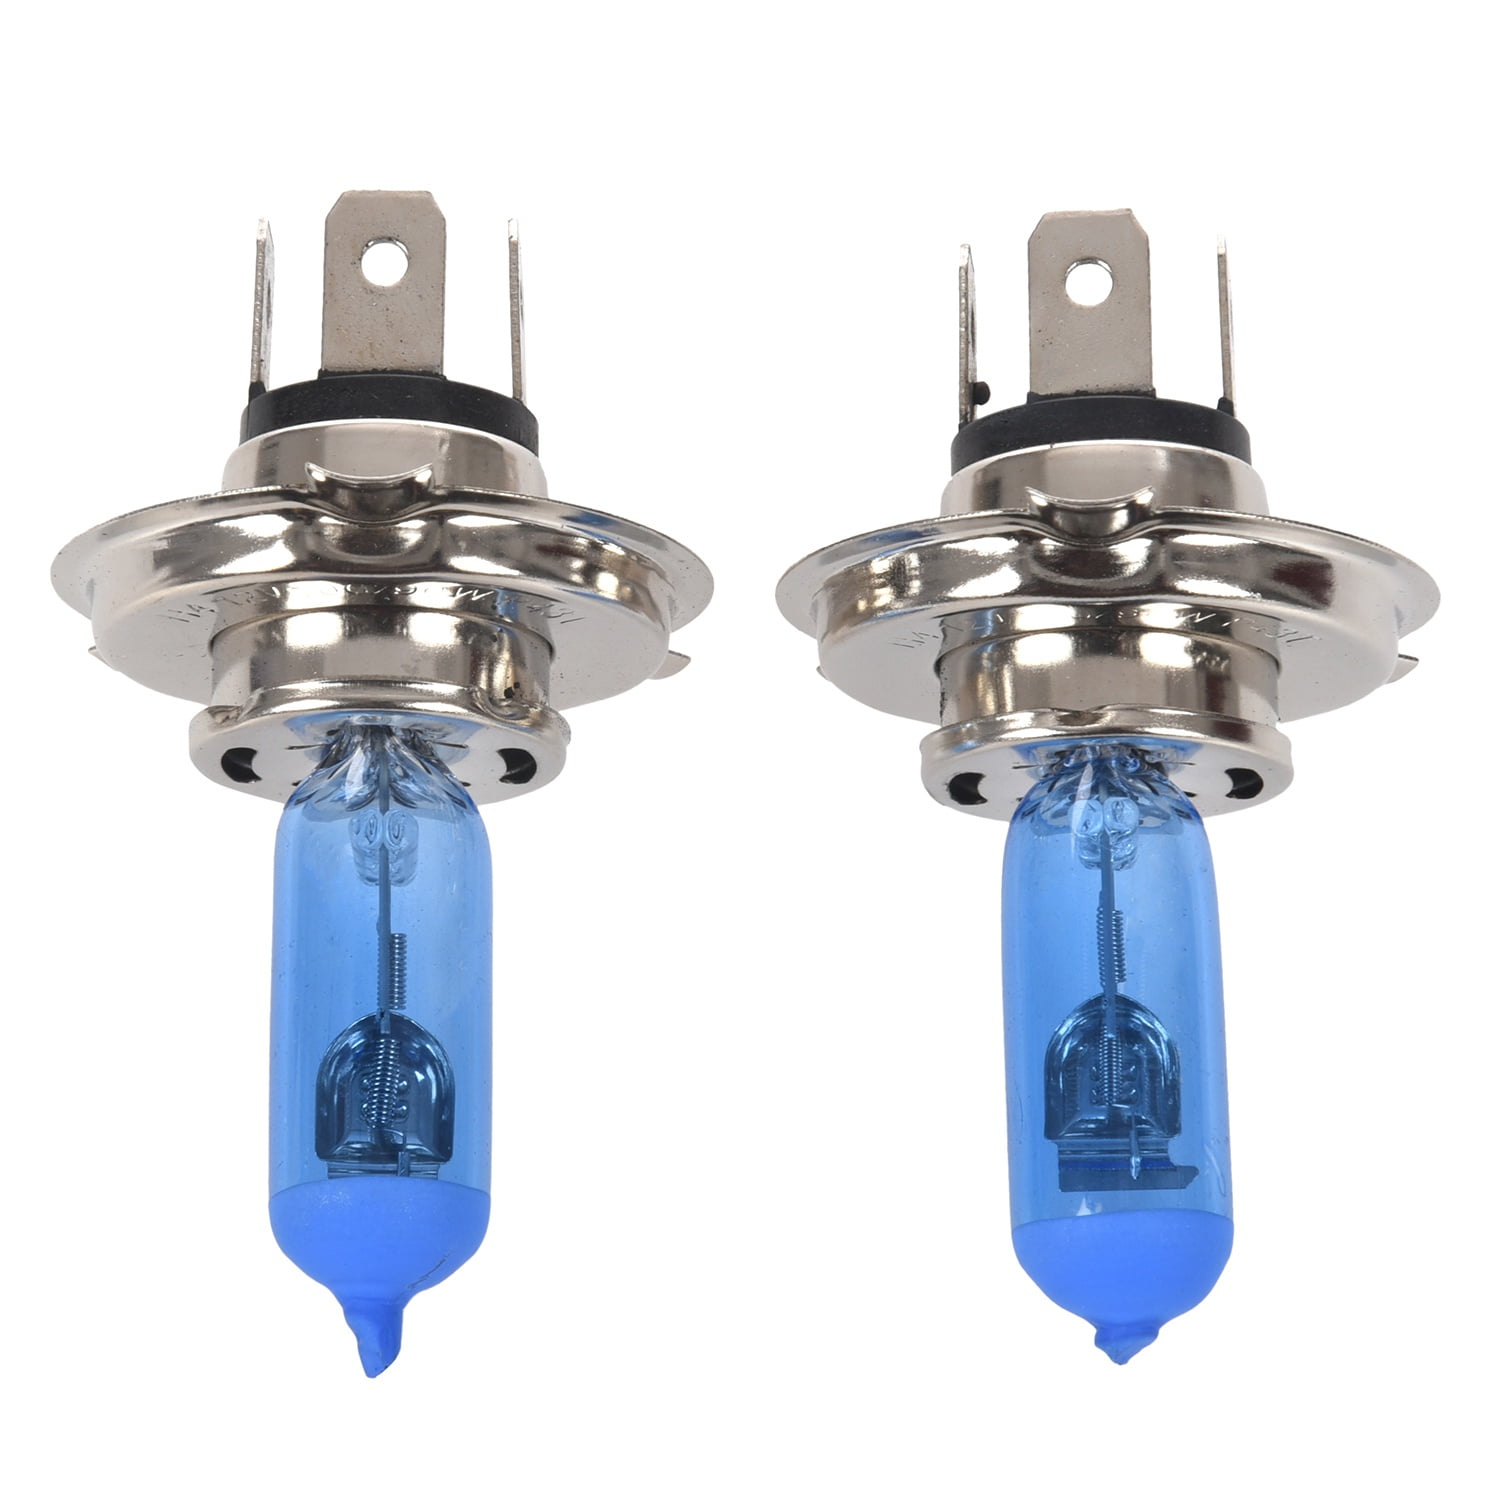 H4 501 55w ICE Blue HID Xenon Upgrade High/Low/LED Trade Side Light Bulbs